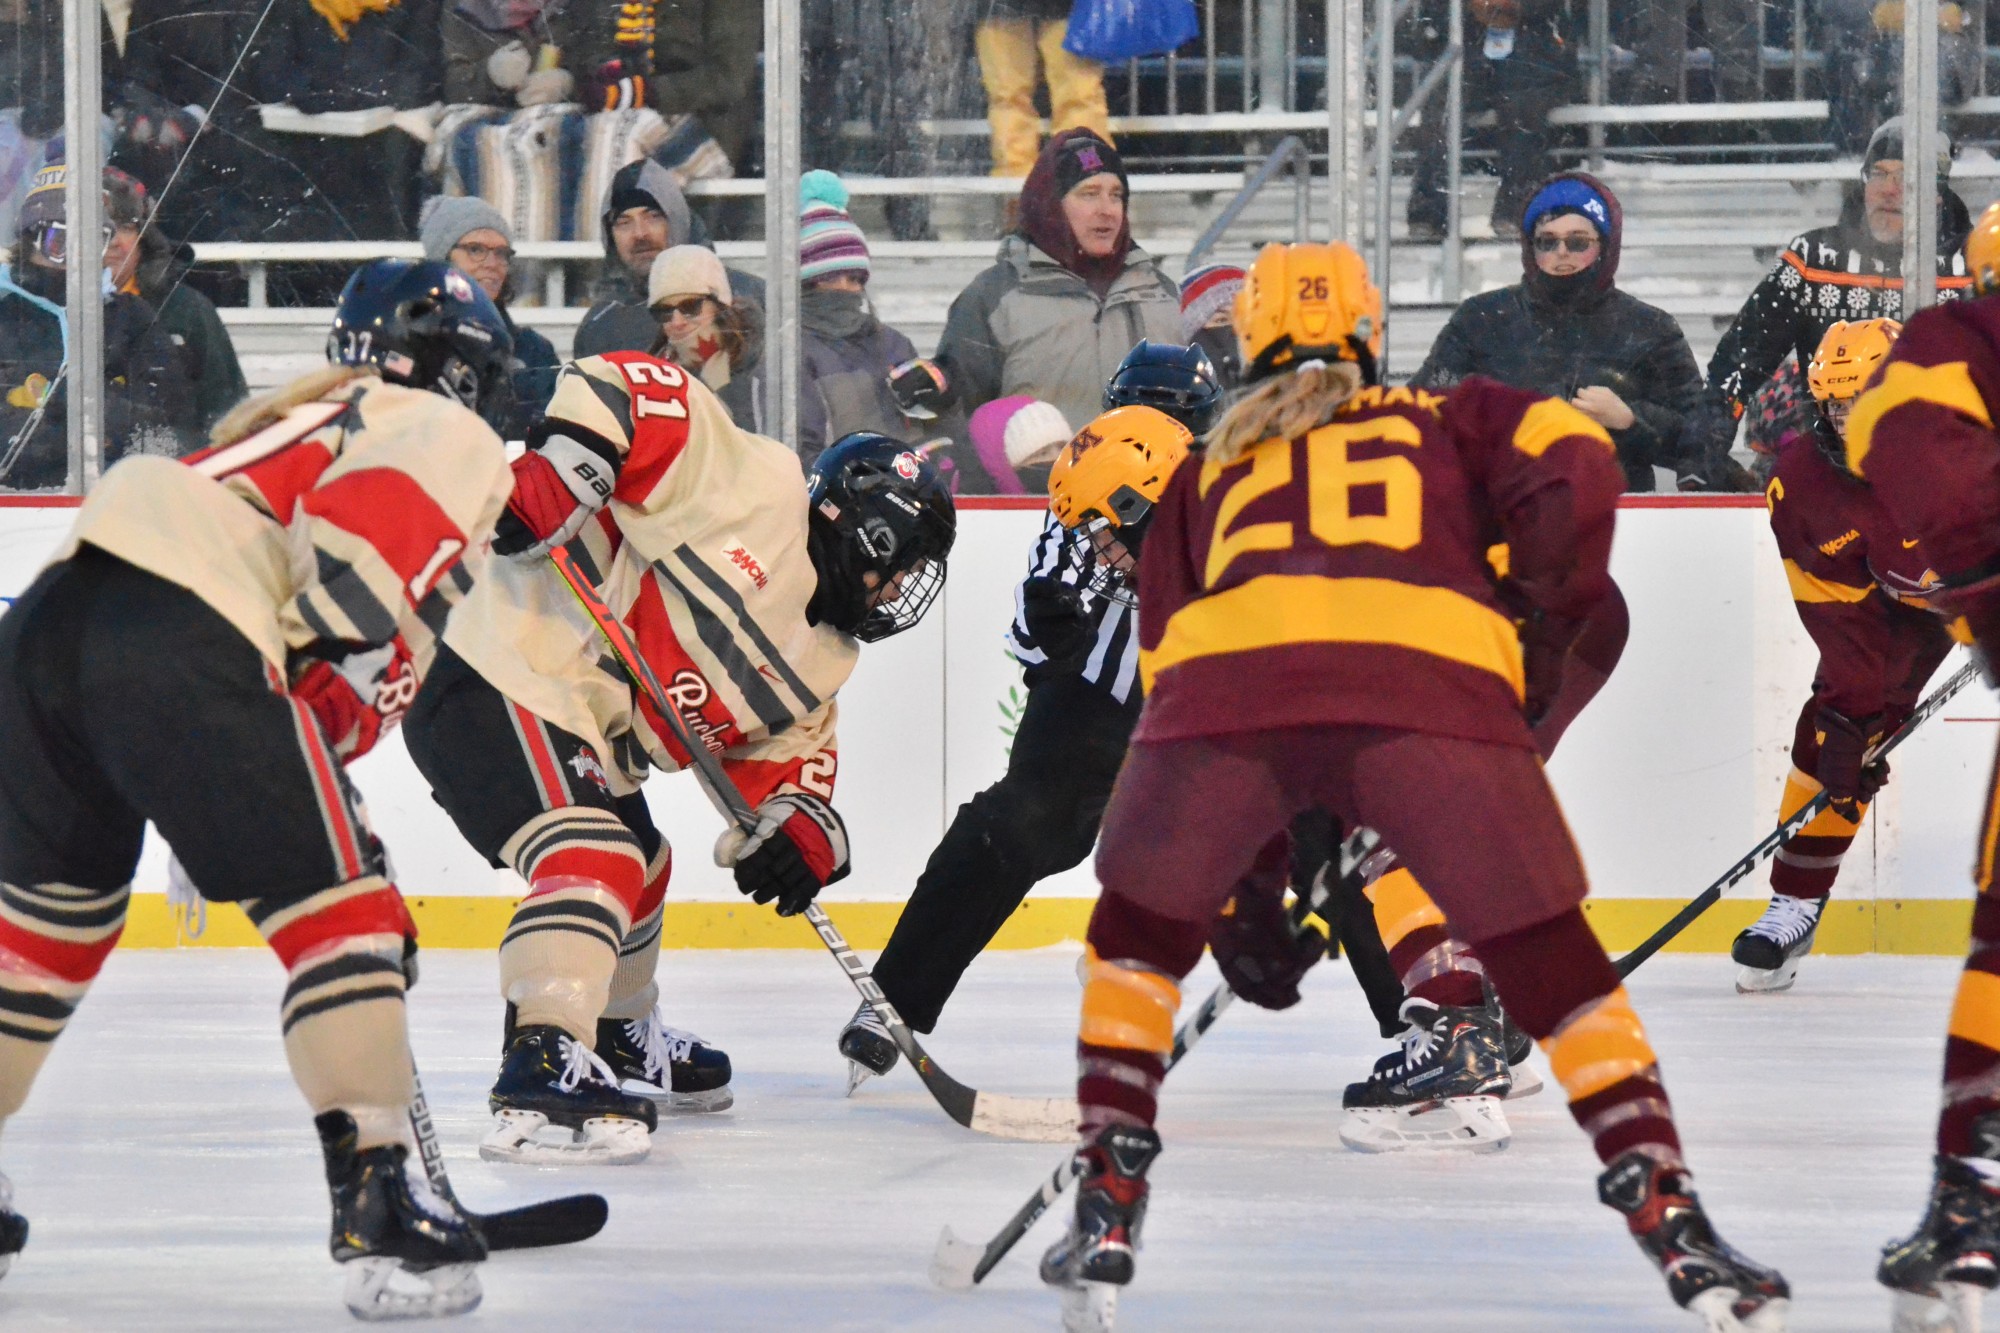 The Gophers play Ohio State as part of an outdoor game at Parade Stadium in Minneapolis on Saturday, Jan. 18. (Anna Landis / Minnesota Daily)